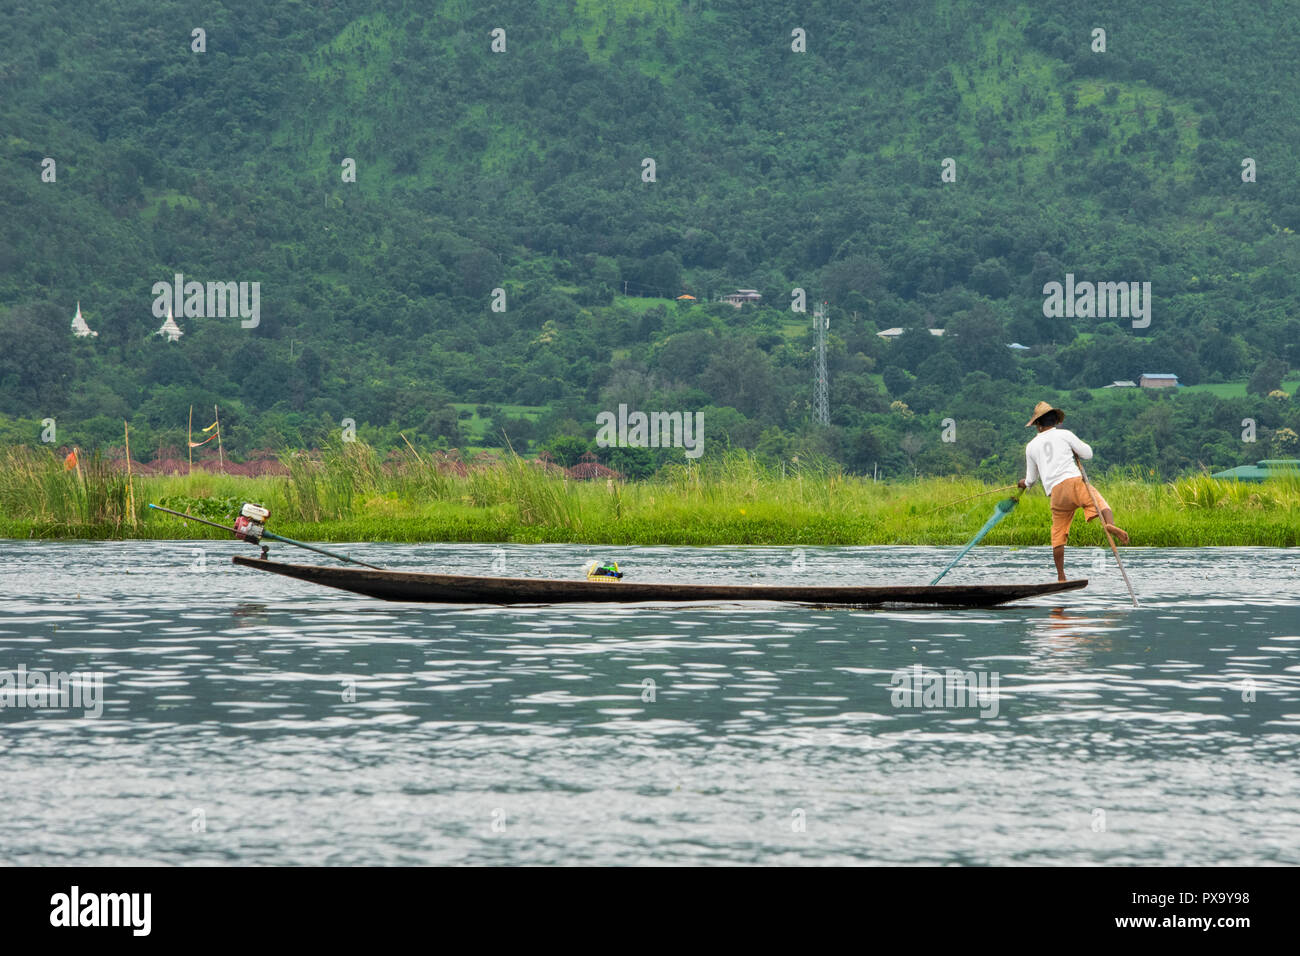 Travel, local fisherman in white shirt and orange shorts balancing on one foot on the tip of the boat and pulling net to collect fish, Inle Lake Burma Stock Photo